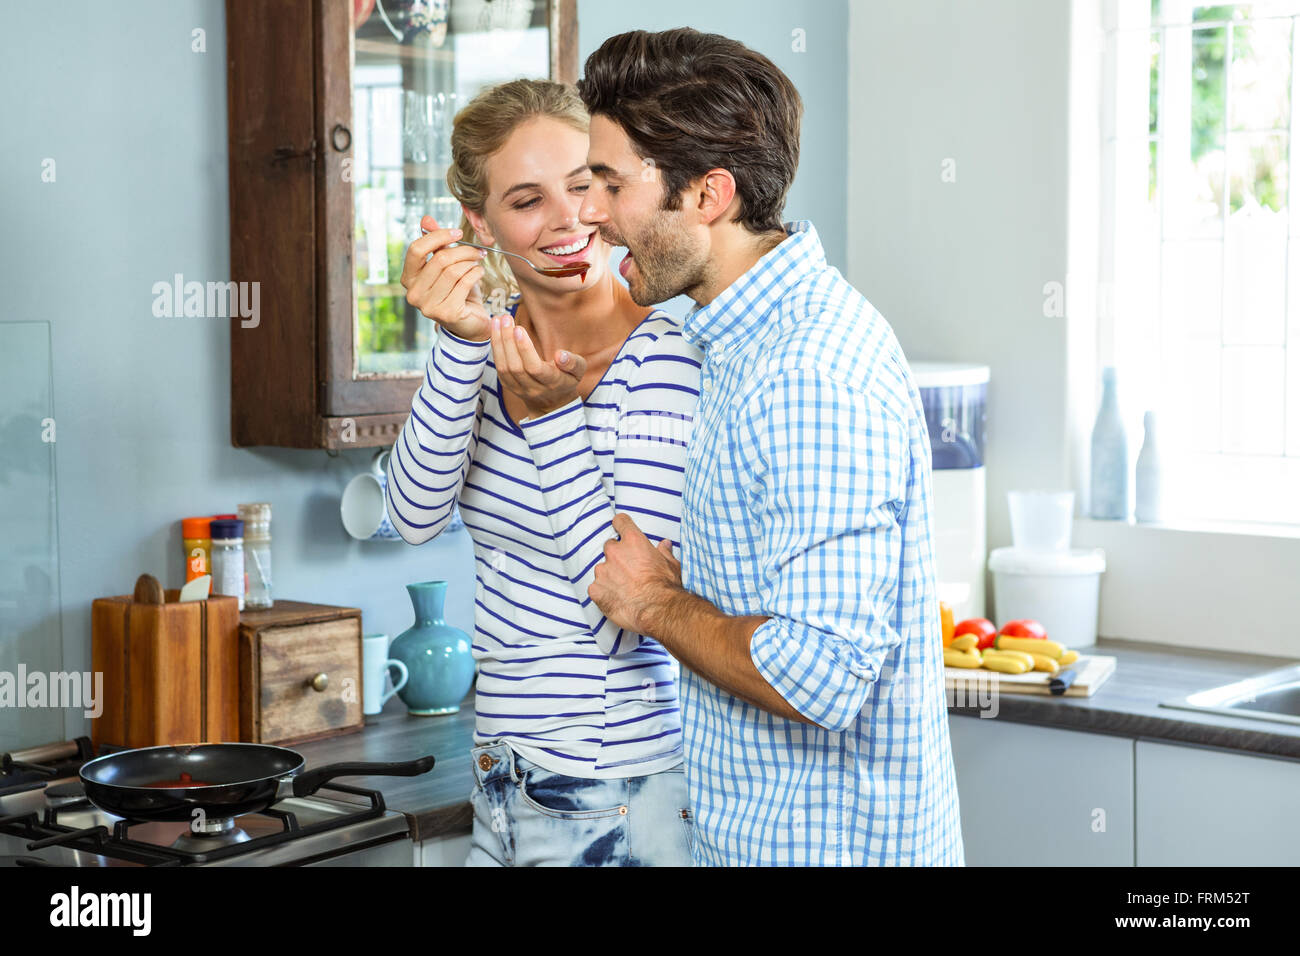 Smiling woman letting man taste a sauce with a wooden spoon Stock Photo